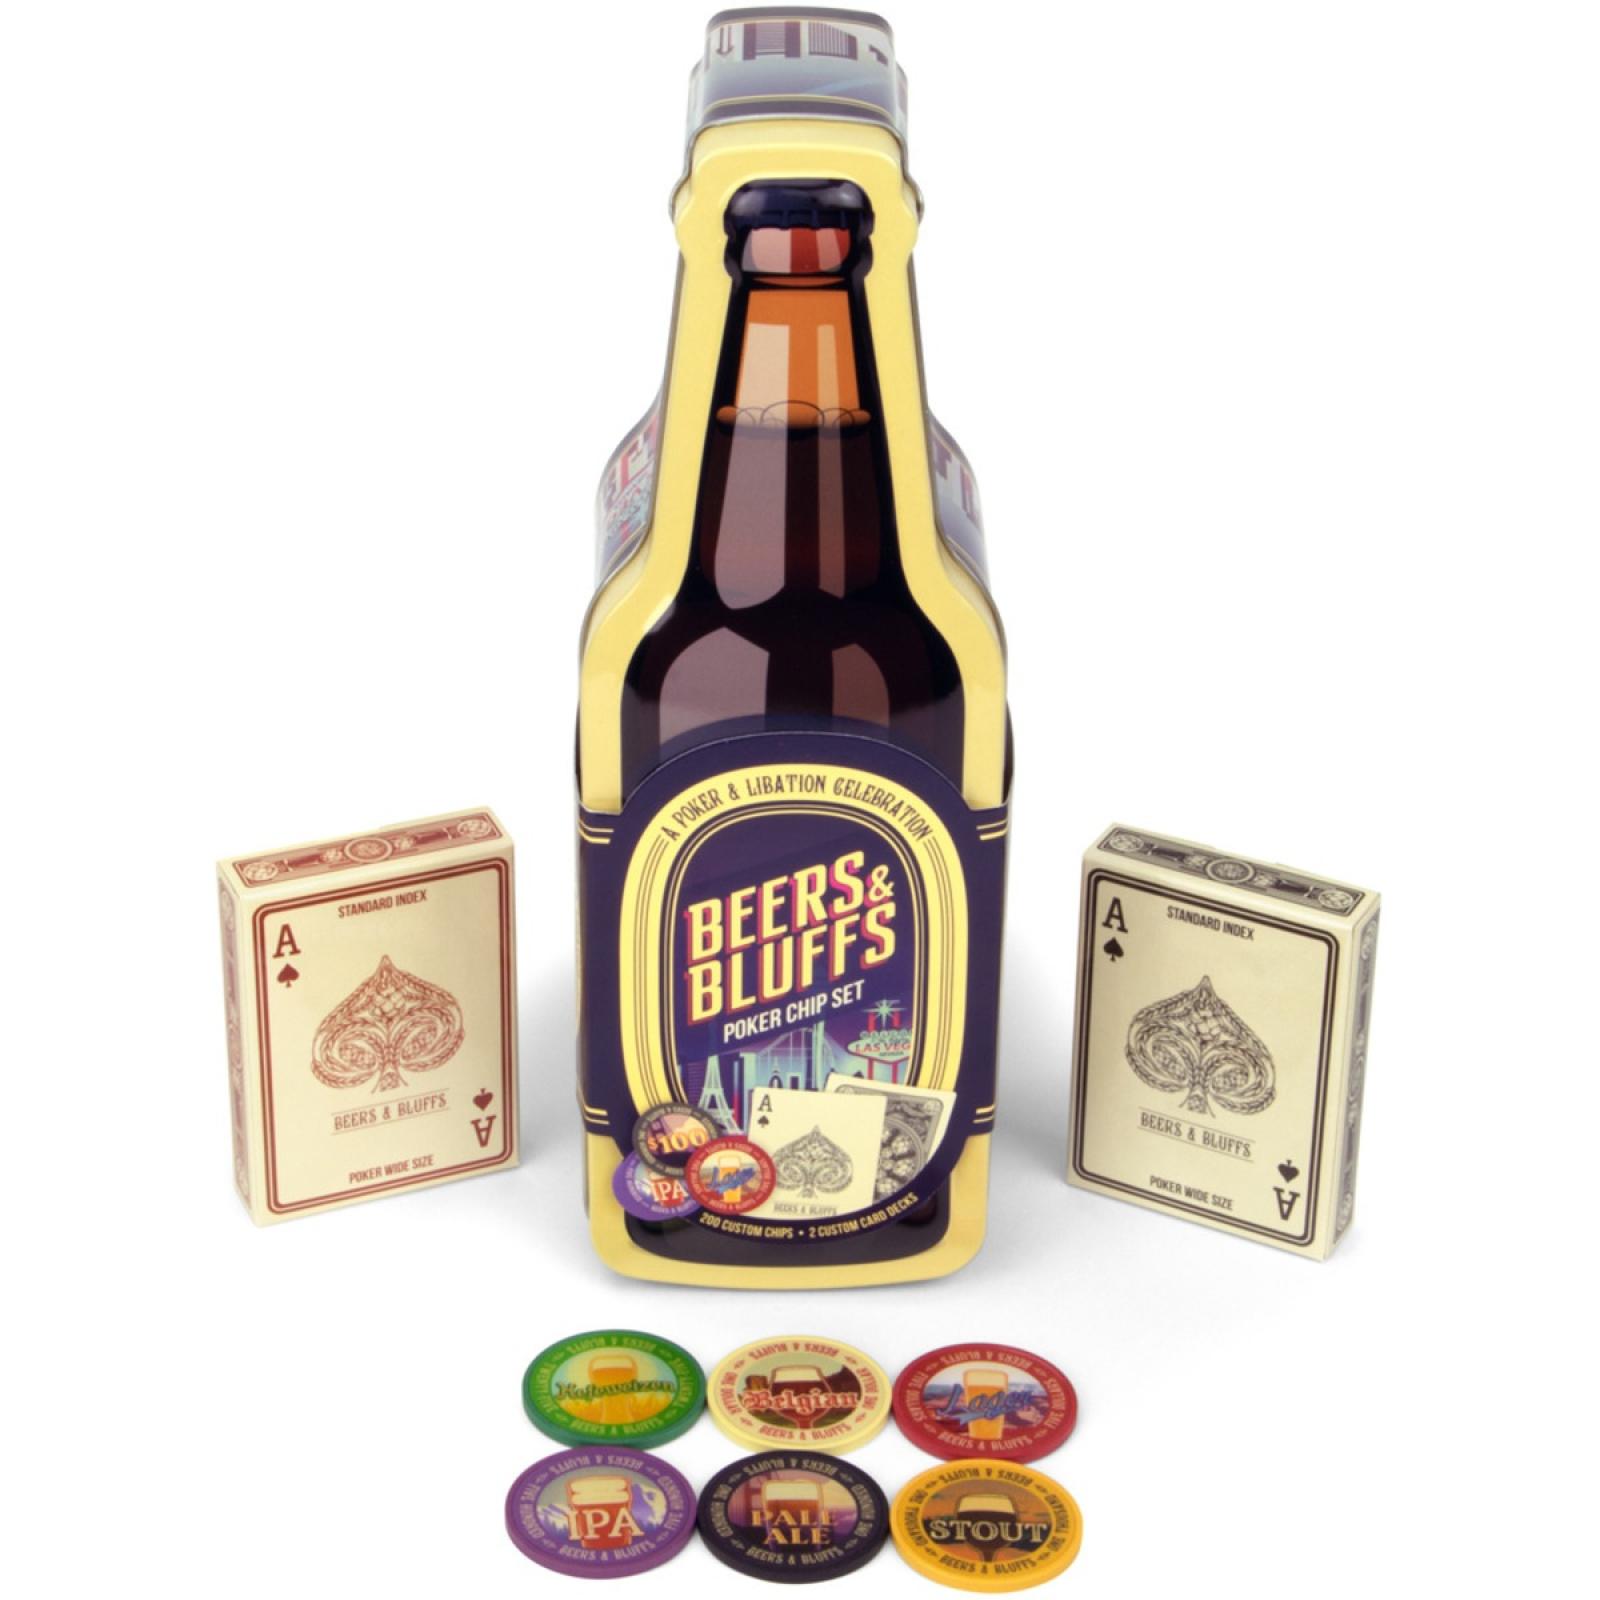 Beers & Bluffs Poker Chip Set Cards, Chips, and Pieces